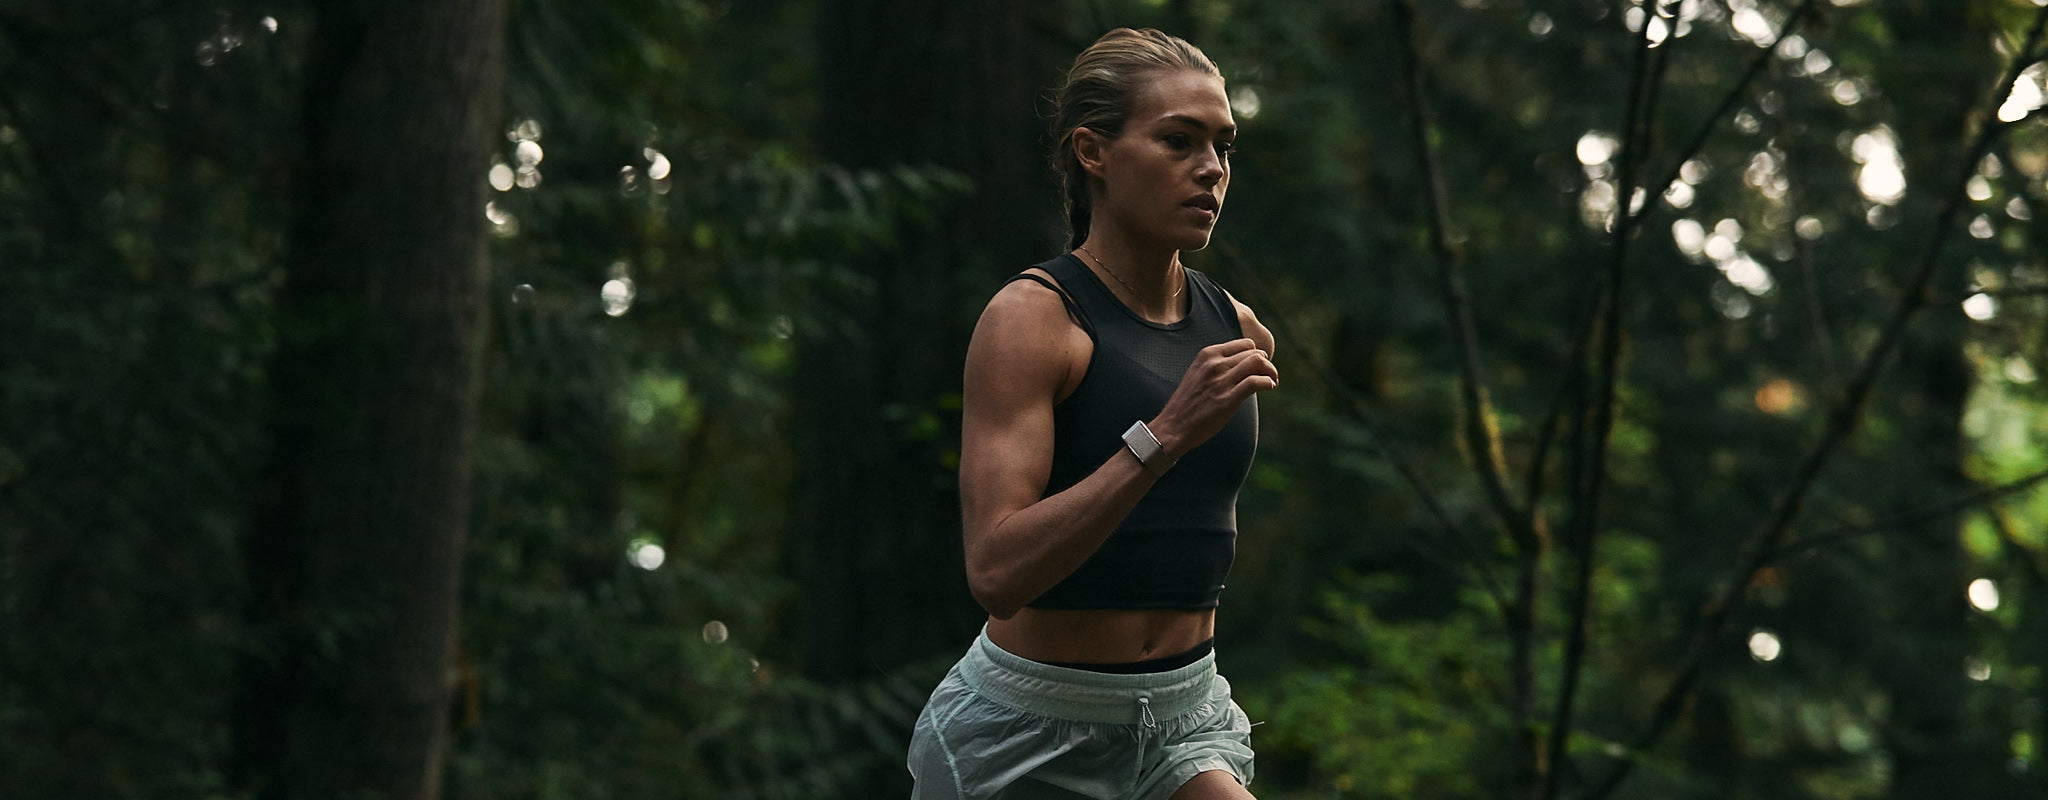 woman jogging through the woods